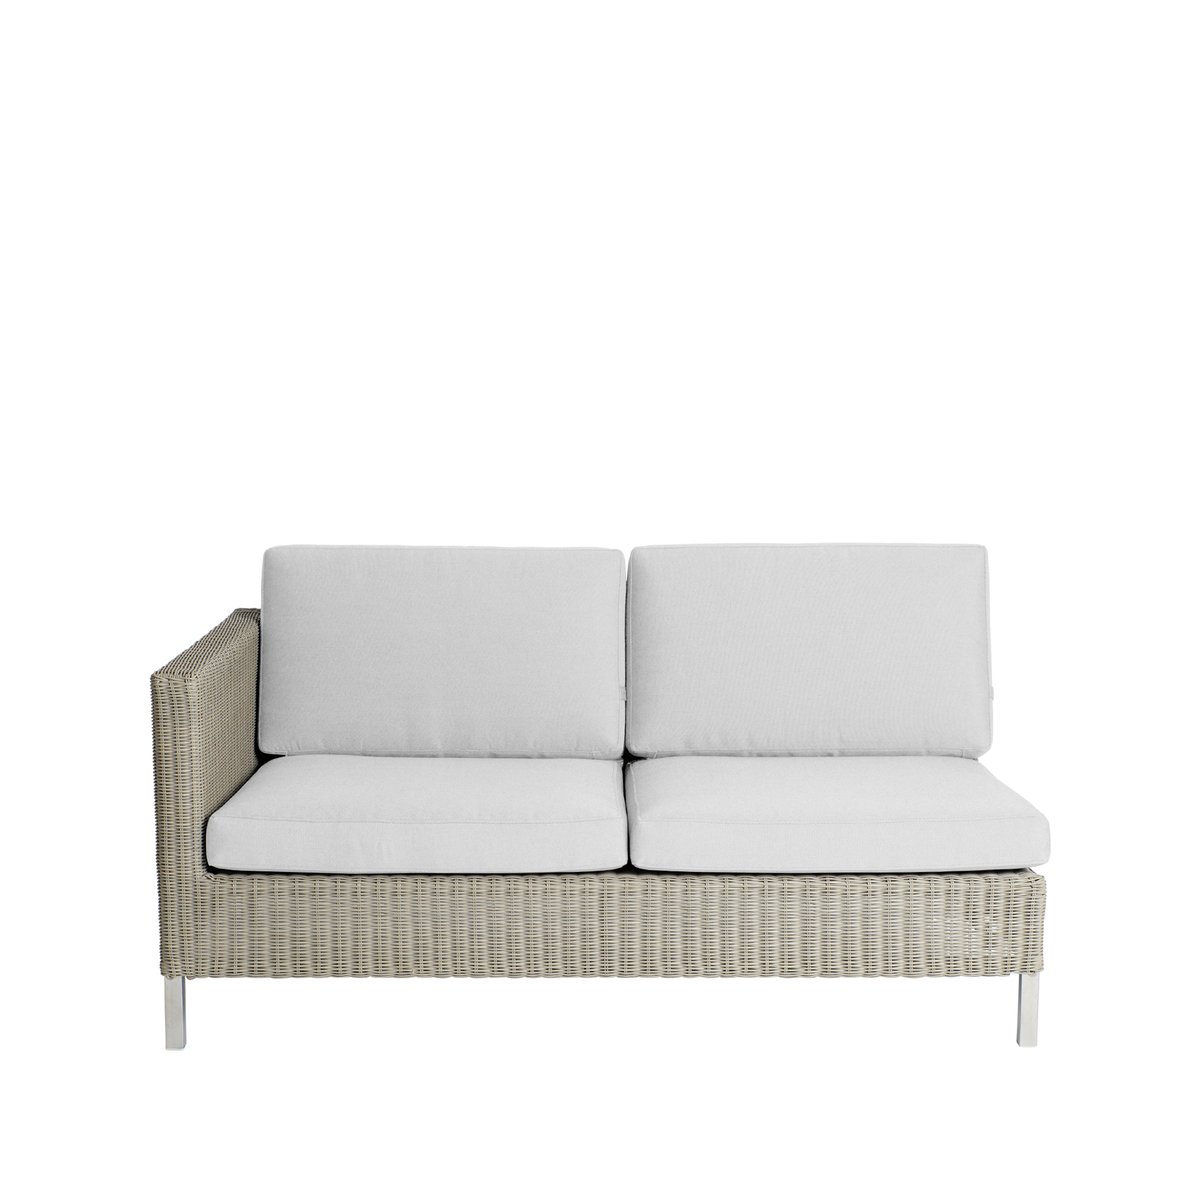 Cane-line Connect modulaire bank 2-zits taupe, rechts, witte kussens